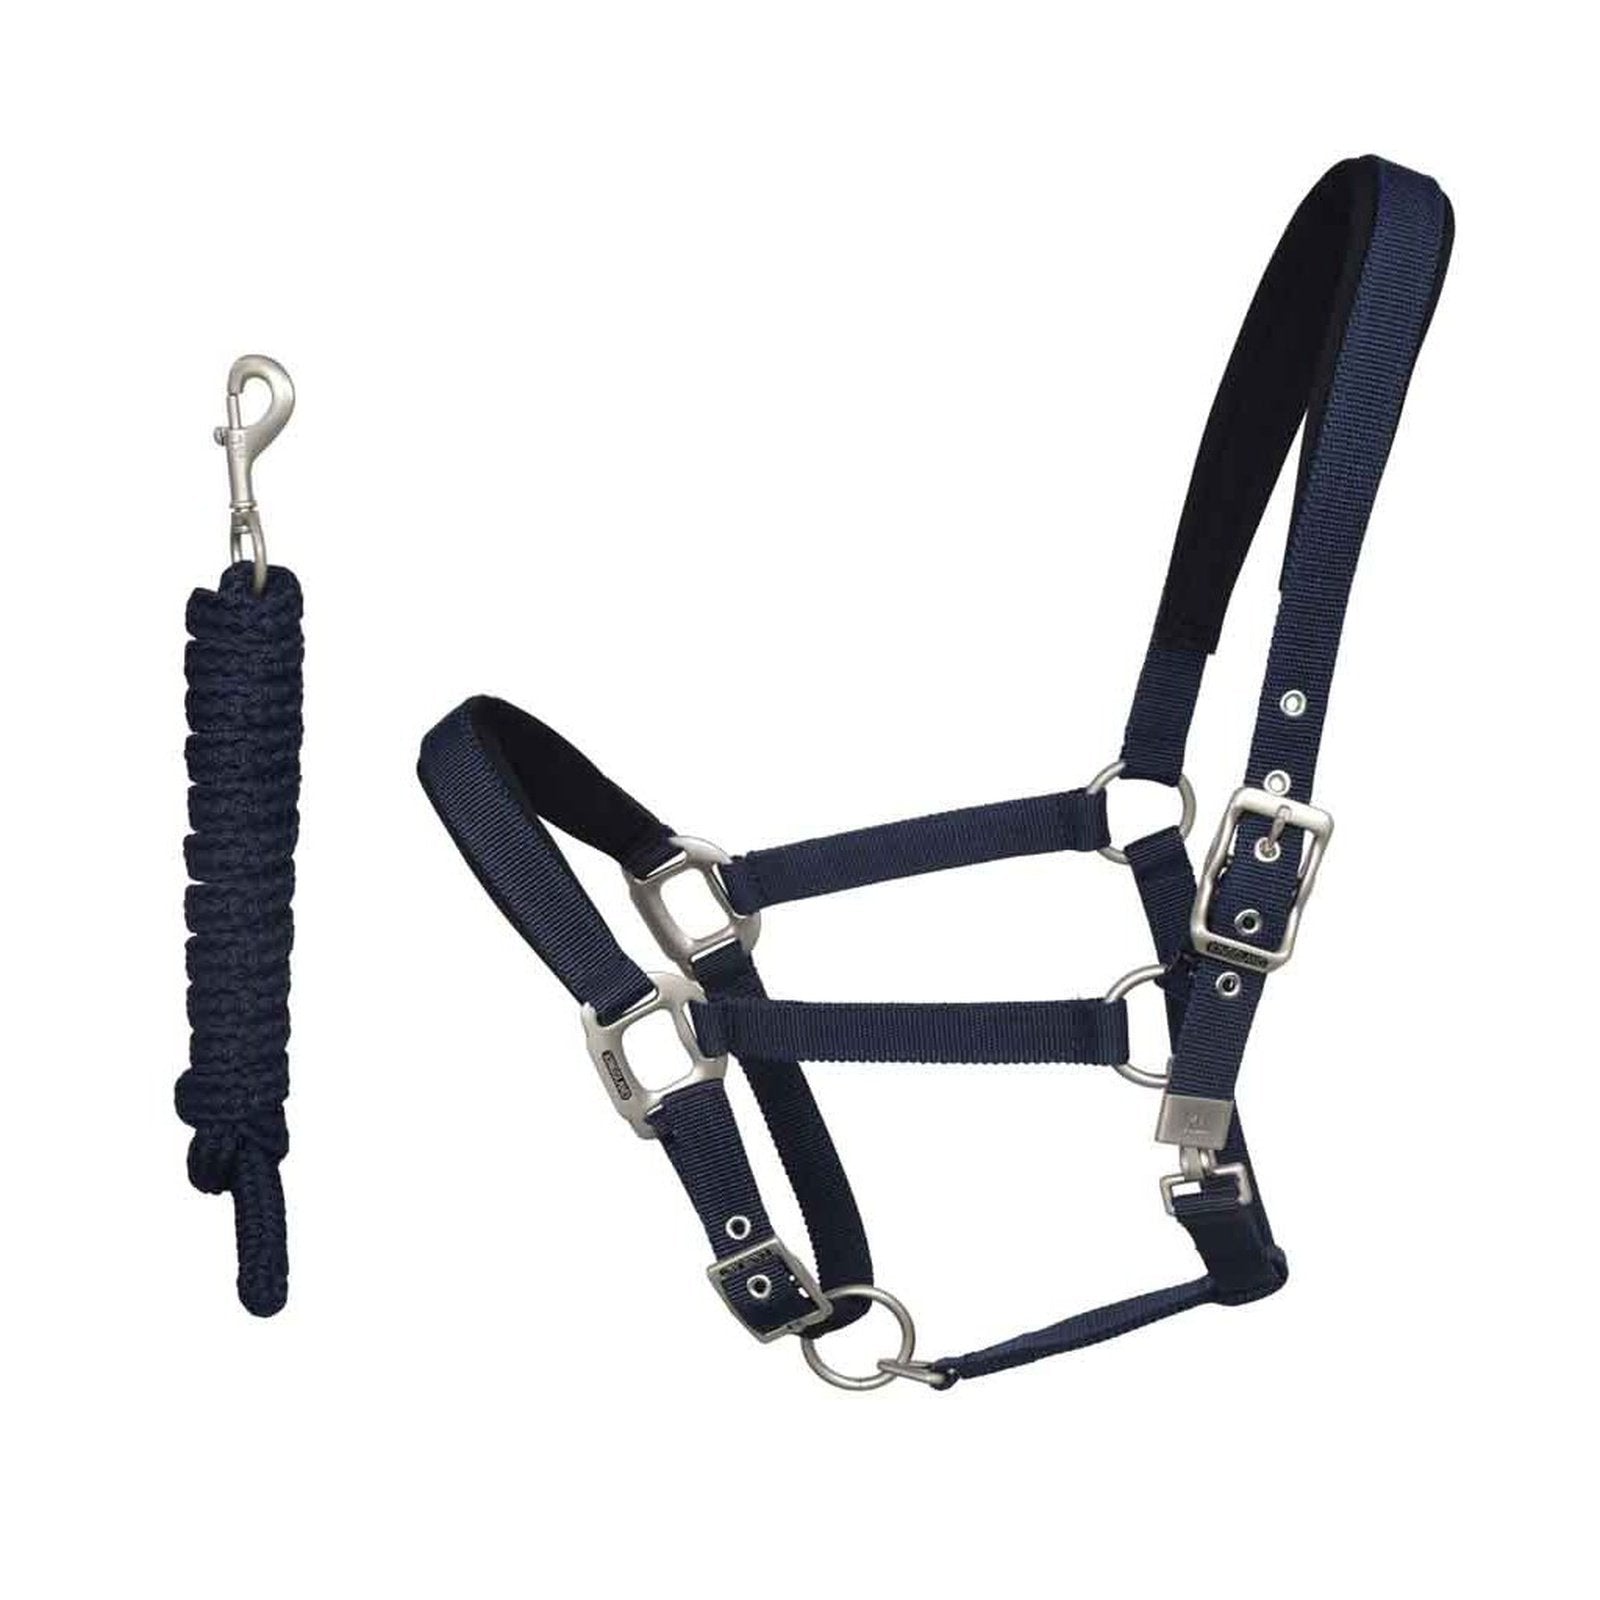 Kingsland Classic Halfter mit Strick in navy & multi bei SP-Reitsport Kingsland bei SP-Reitsport